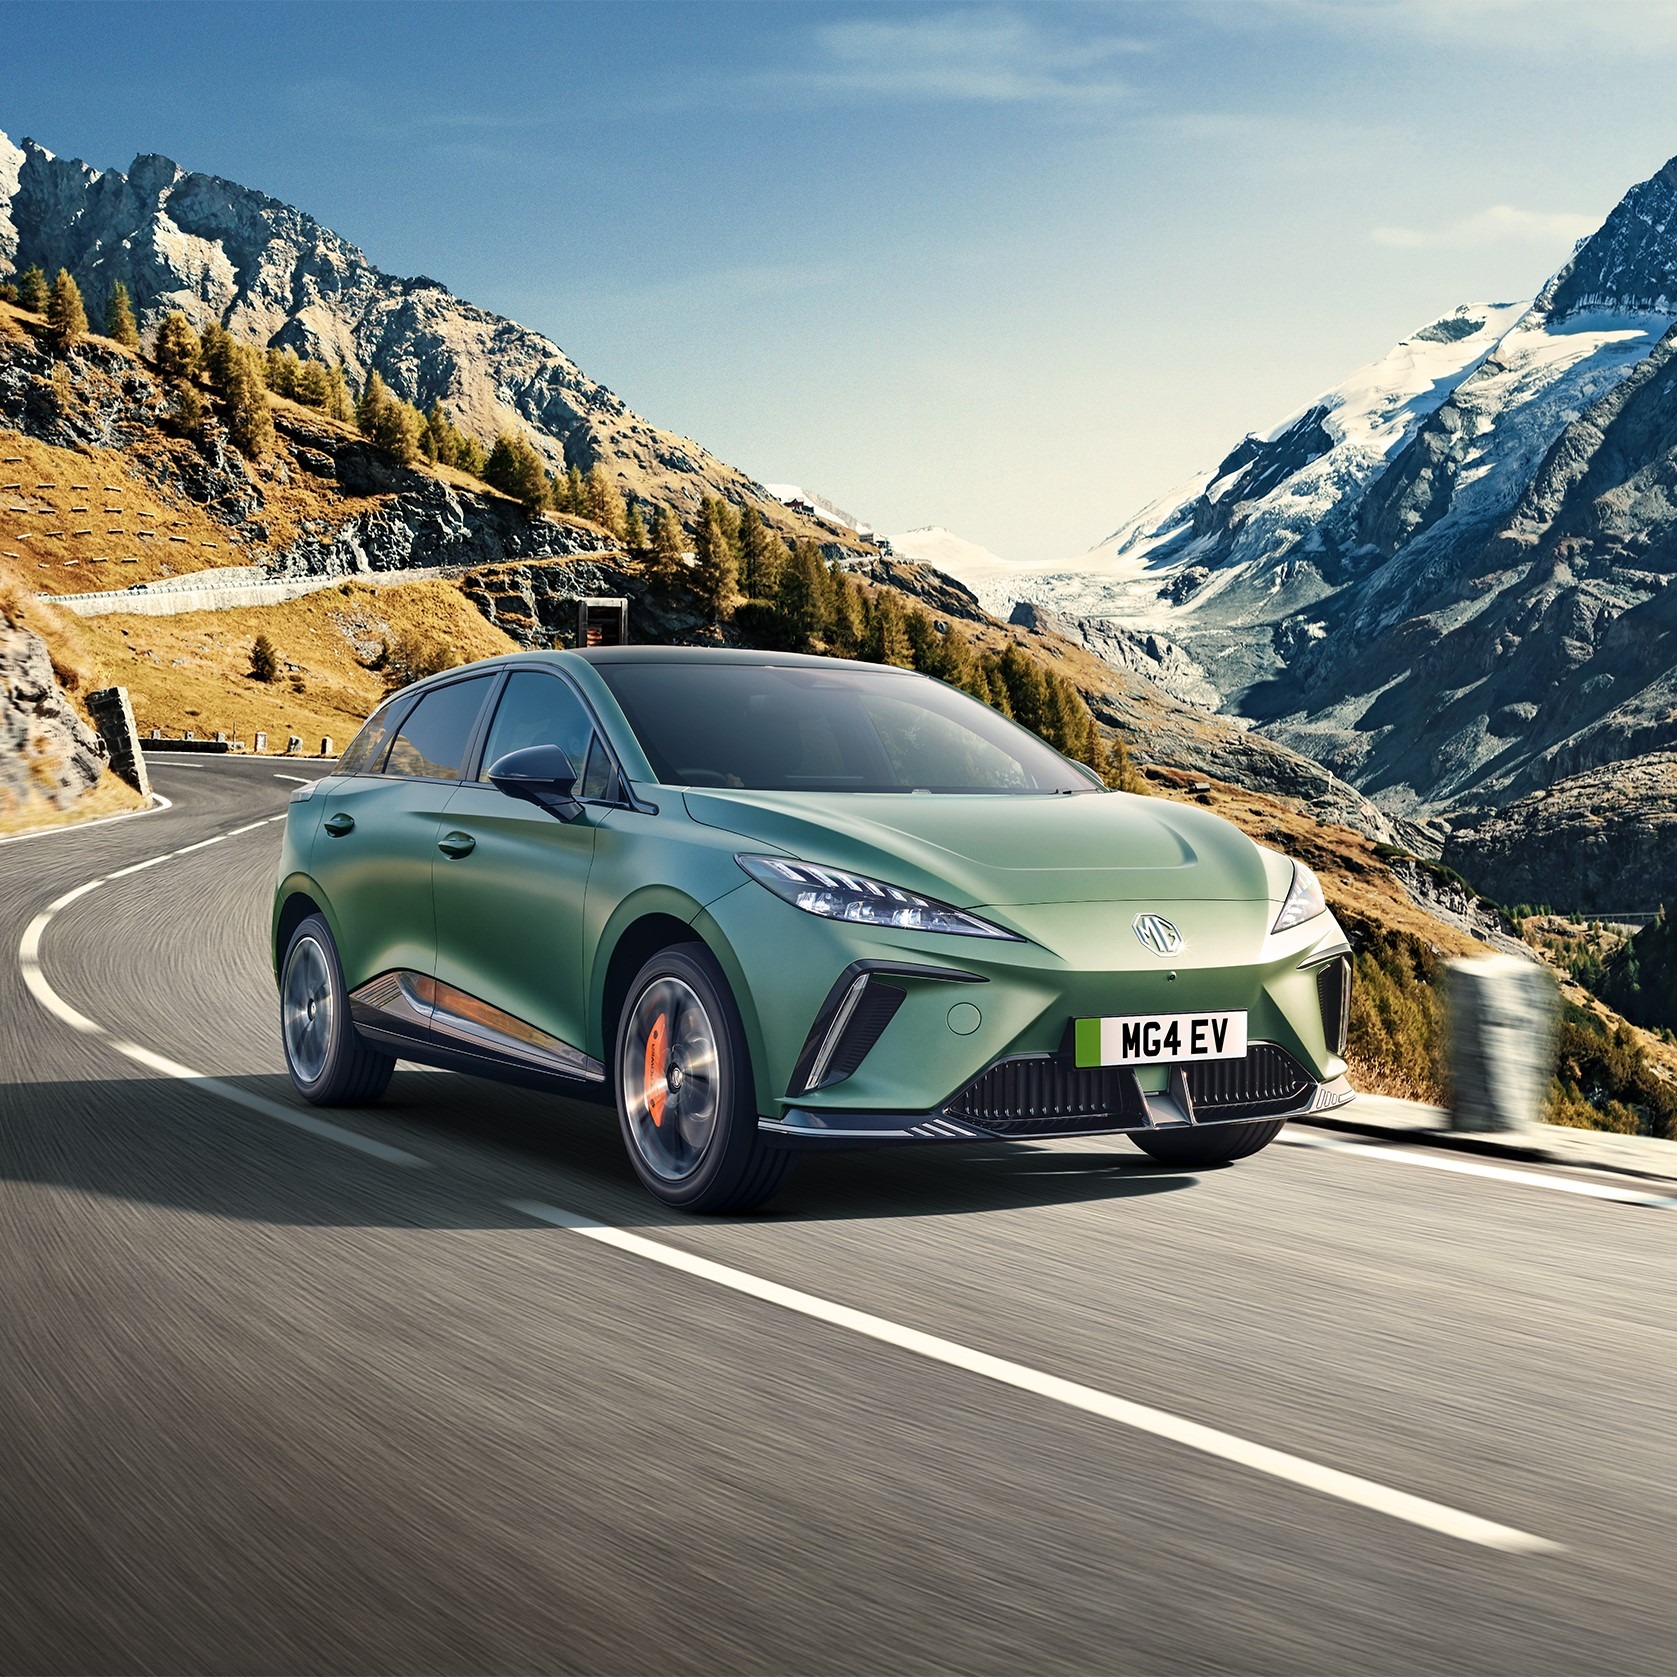 MG4 EV XPOWER receives The Sun Hot Hatch of the Year Award